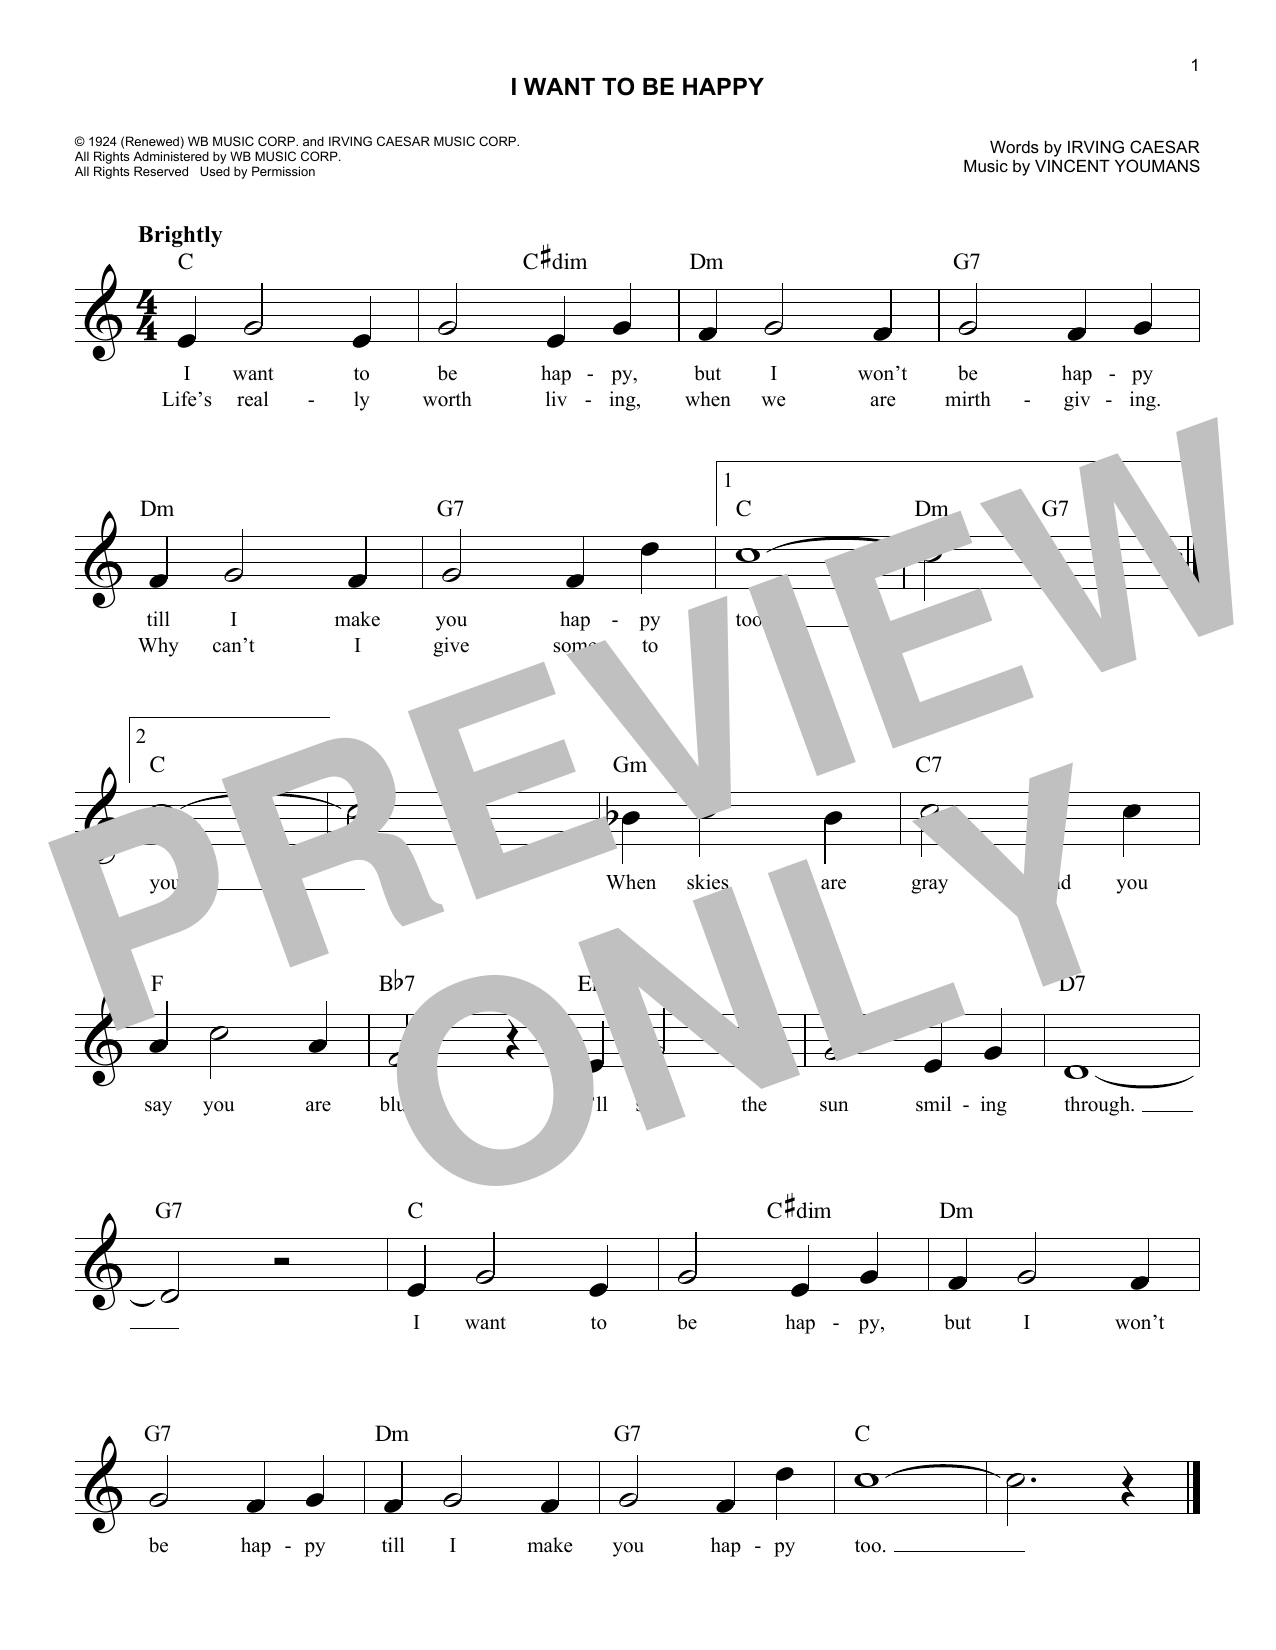 Download Irving Caesar I Want To Be Happy Sheet Music